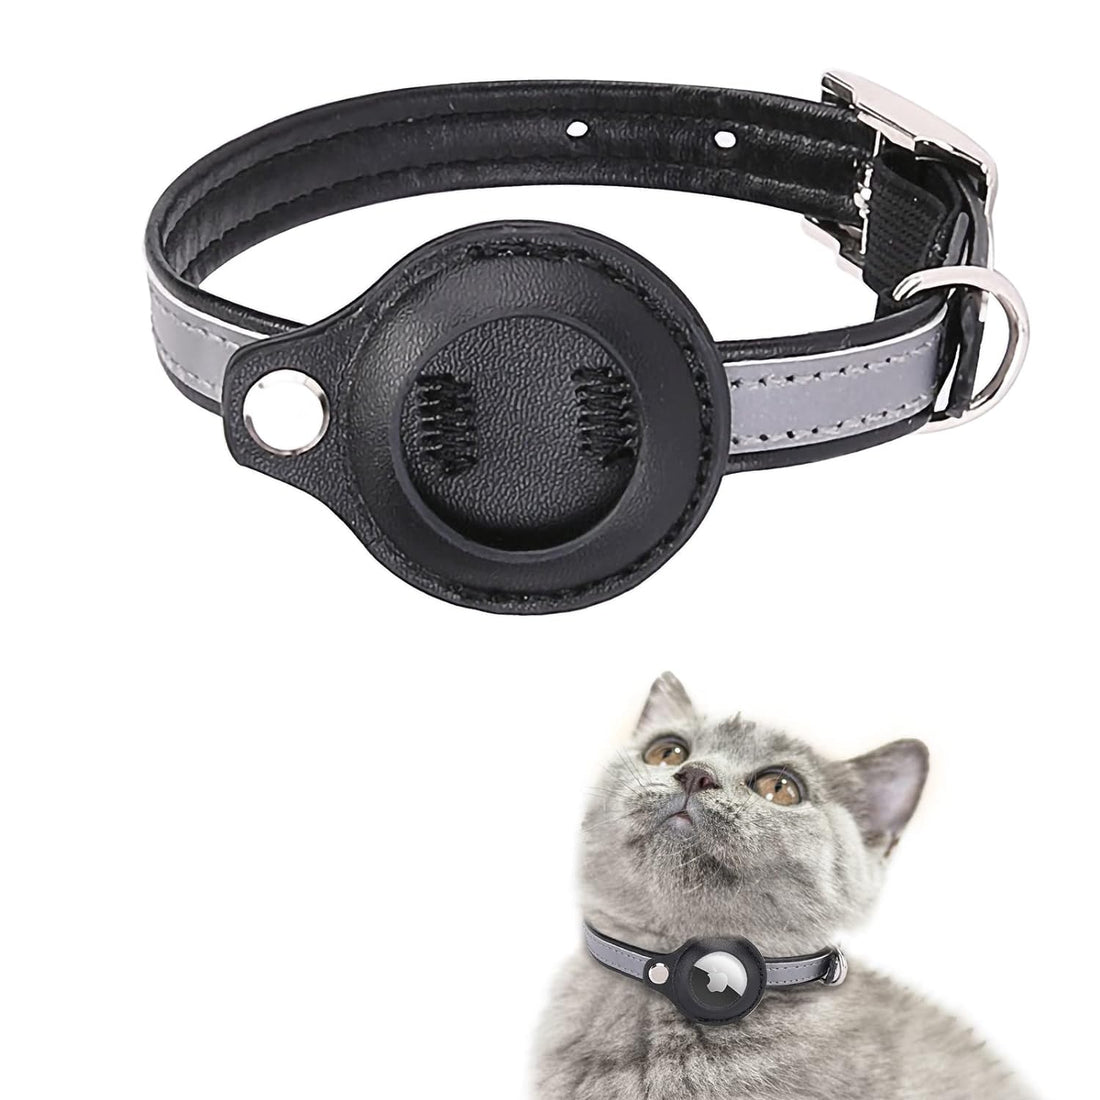 Aginkgo Cat Collar for AirTag Reflective Kitten Collar with Air Tag Holder Lightweight Tracker Breakaway Cat Collars Adjustable for Girl Boy Cats Puppies 9.05-11.8 inch Black (Black)